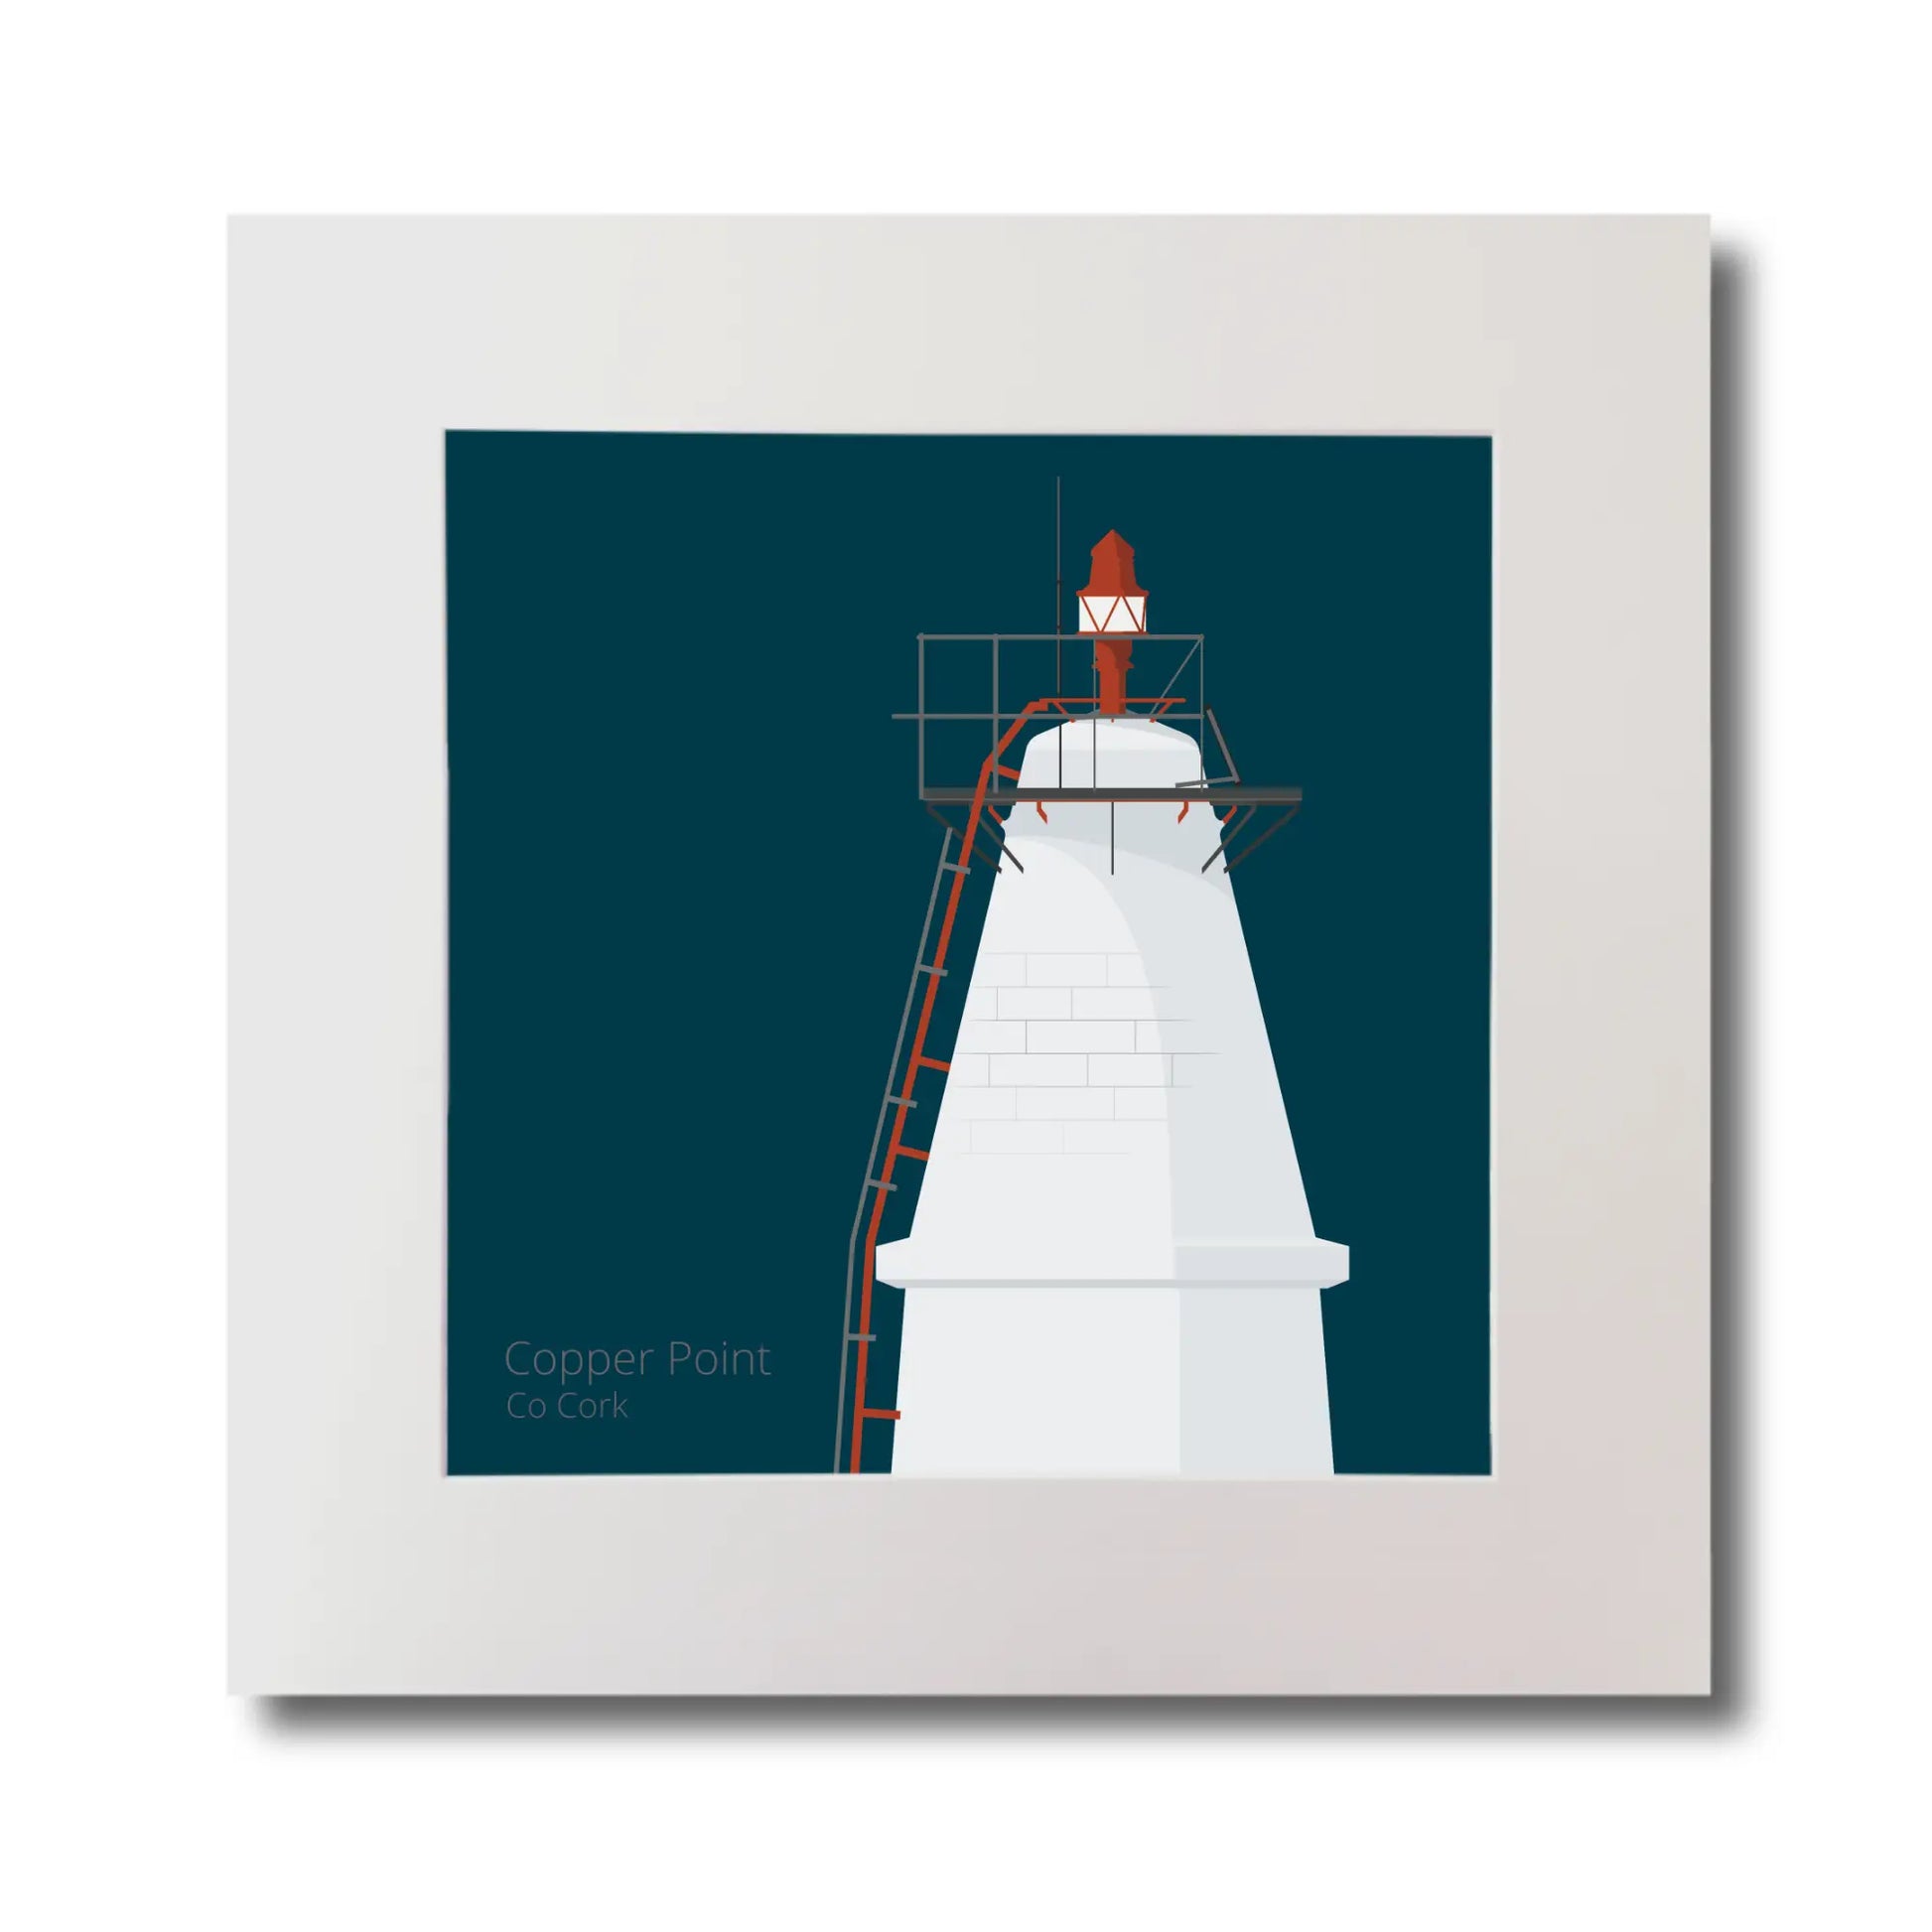 Illustration Copper Point lighthouse on a midnight blue background, mounted and measuring 30x30cm.